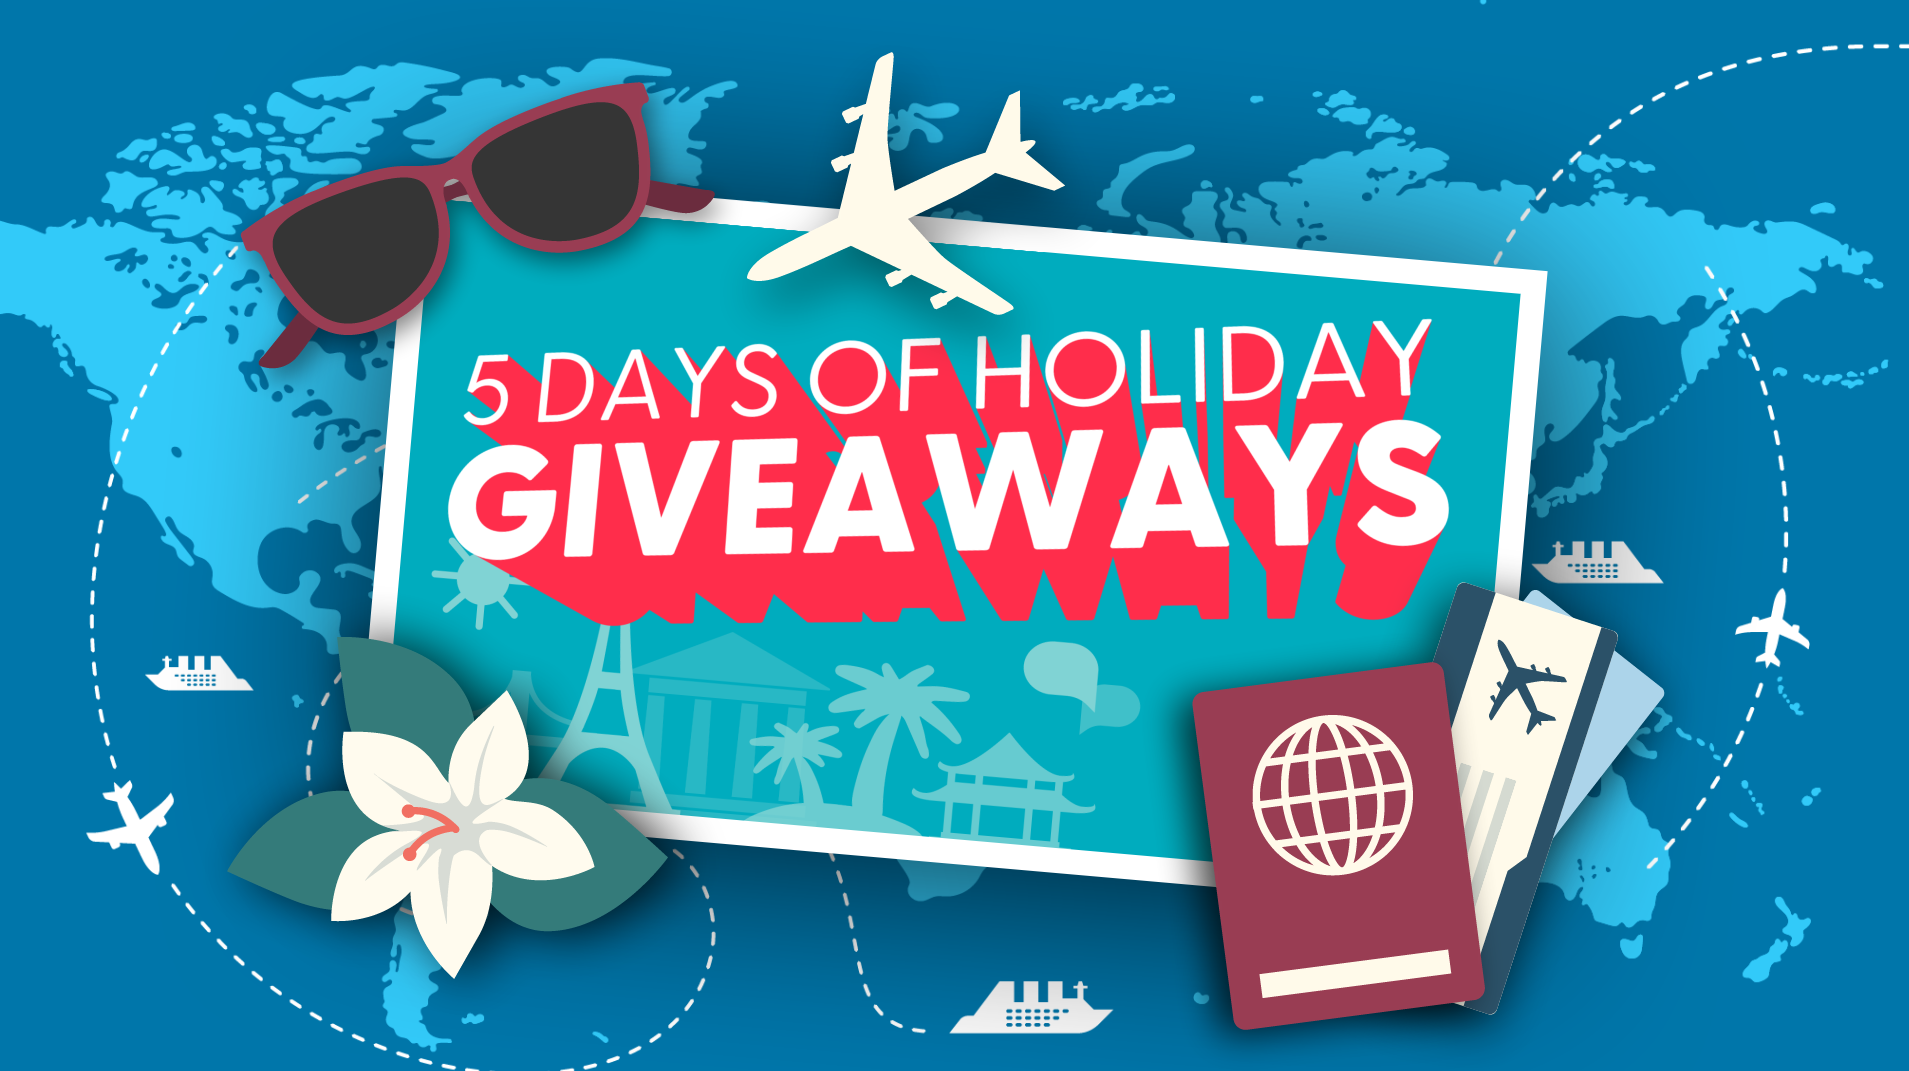 Today giving away a holiday everyday this week